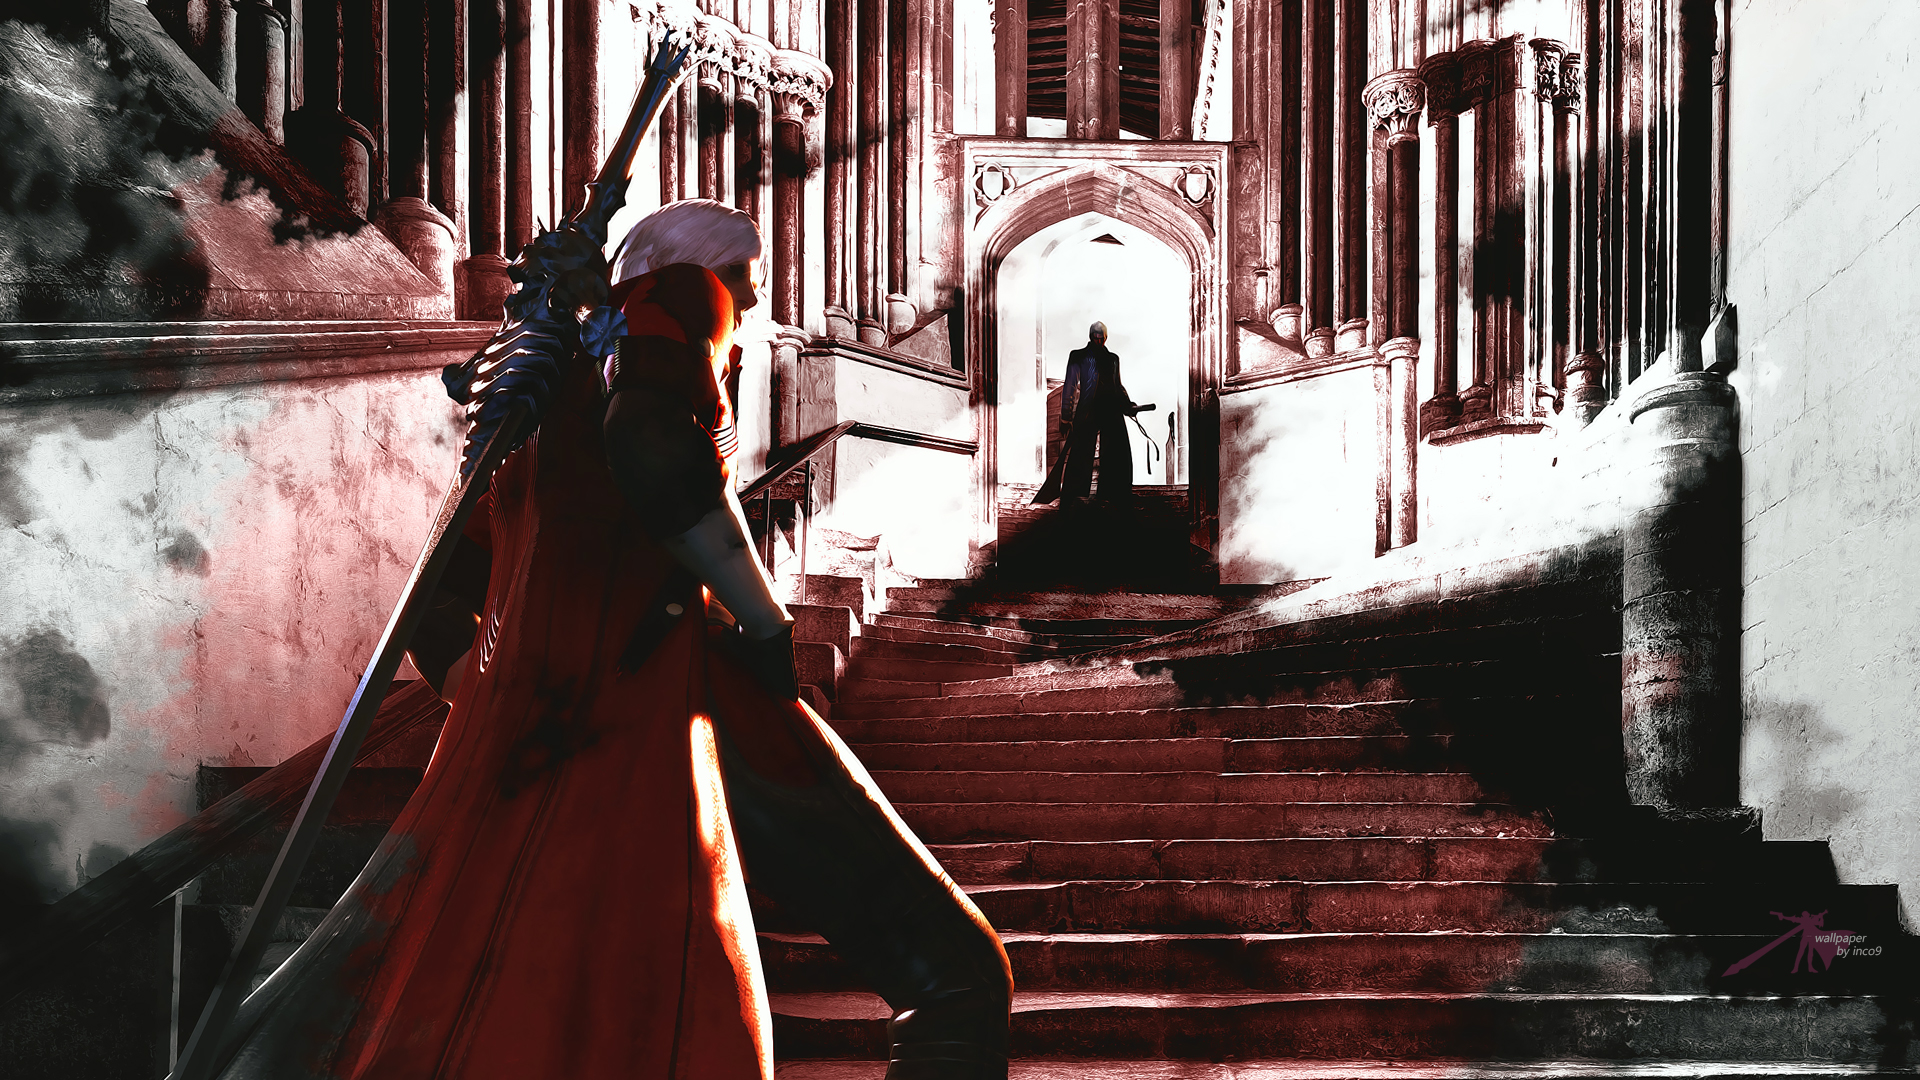 Video Game Devil May Cry 4 HD Wallpaper by inco9